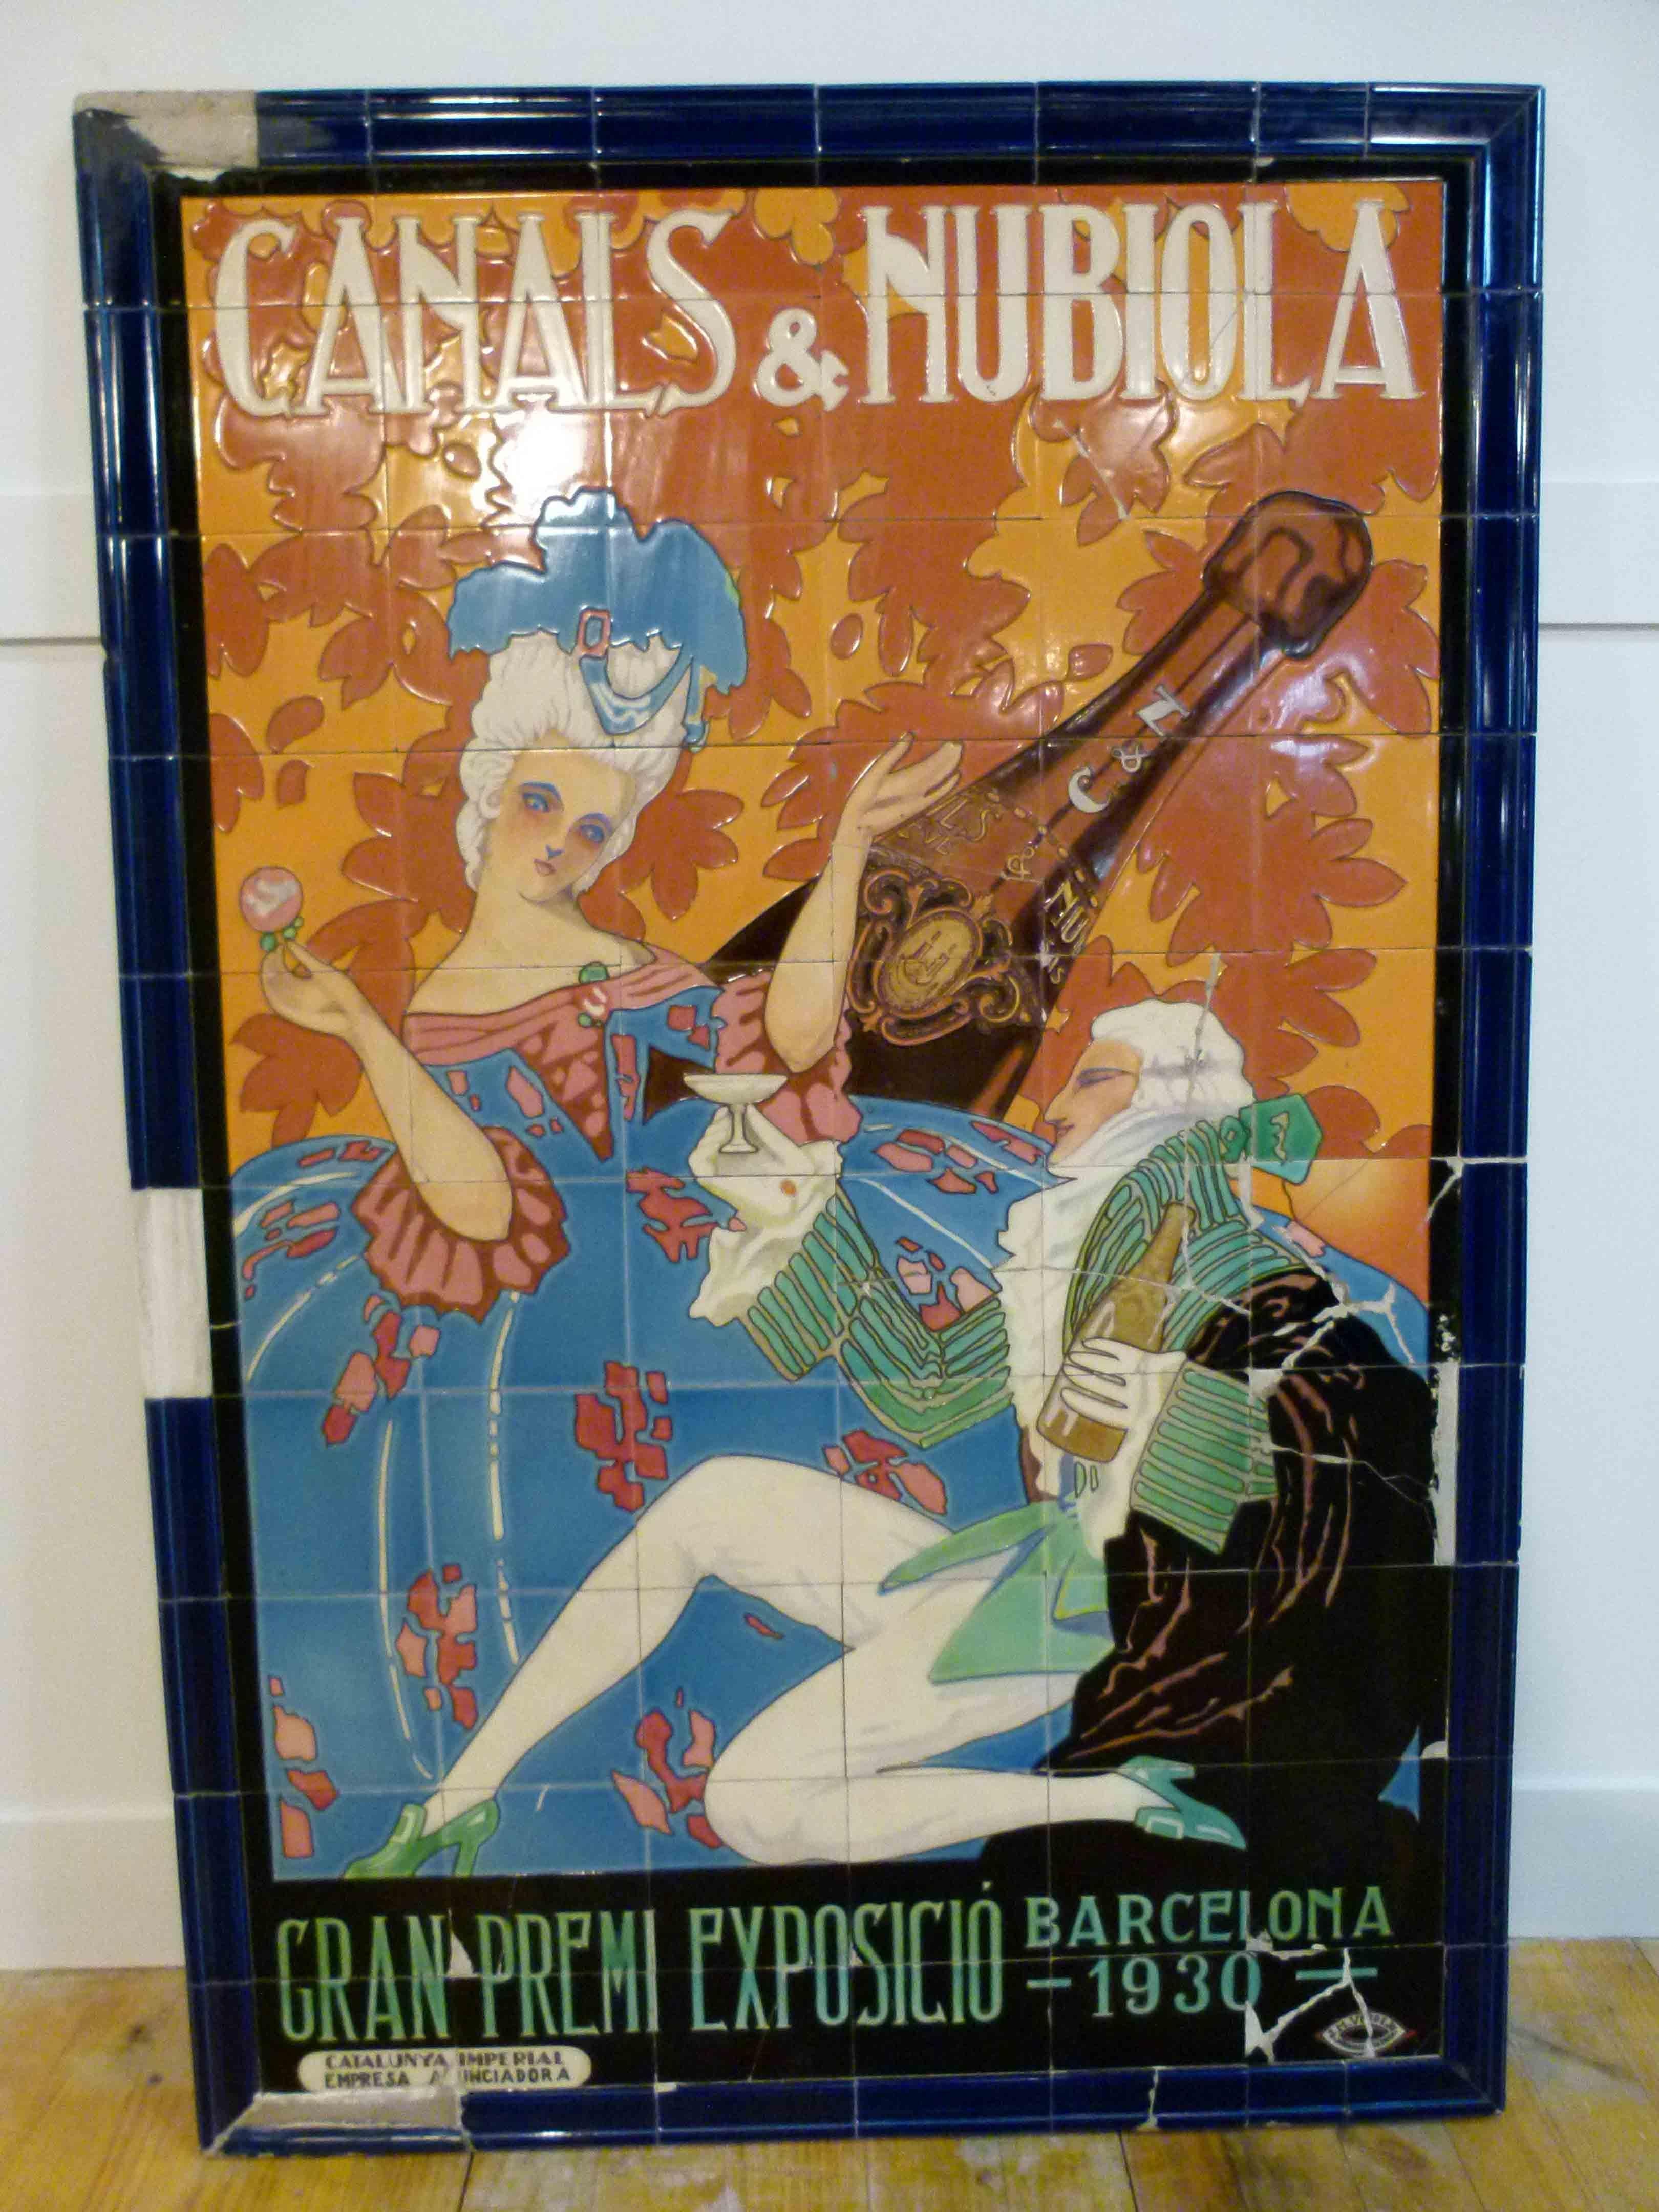 Spanish Art Nouveau Advertising Tile Poster from Canals&Nubiola's Wine Cellar